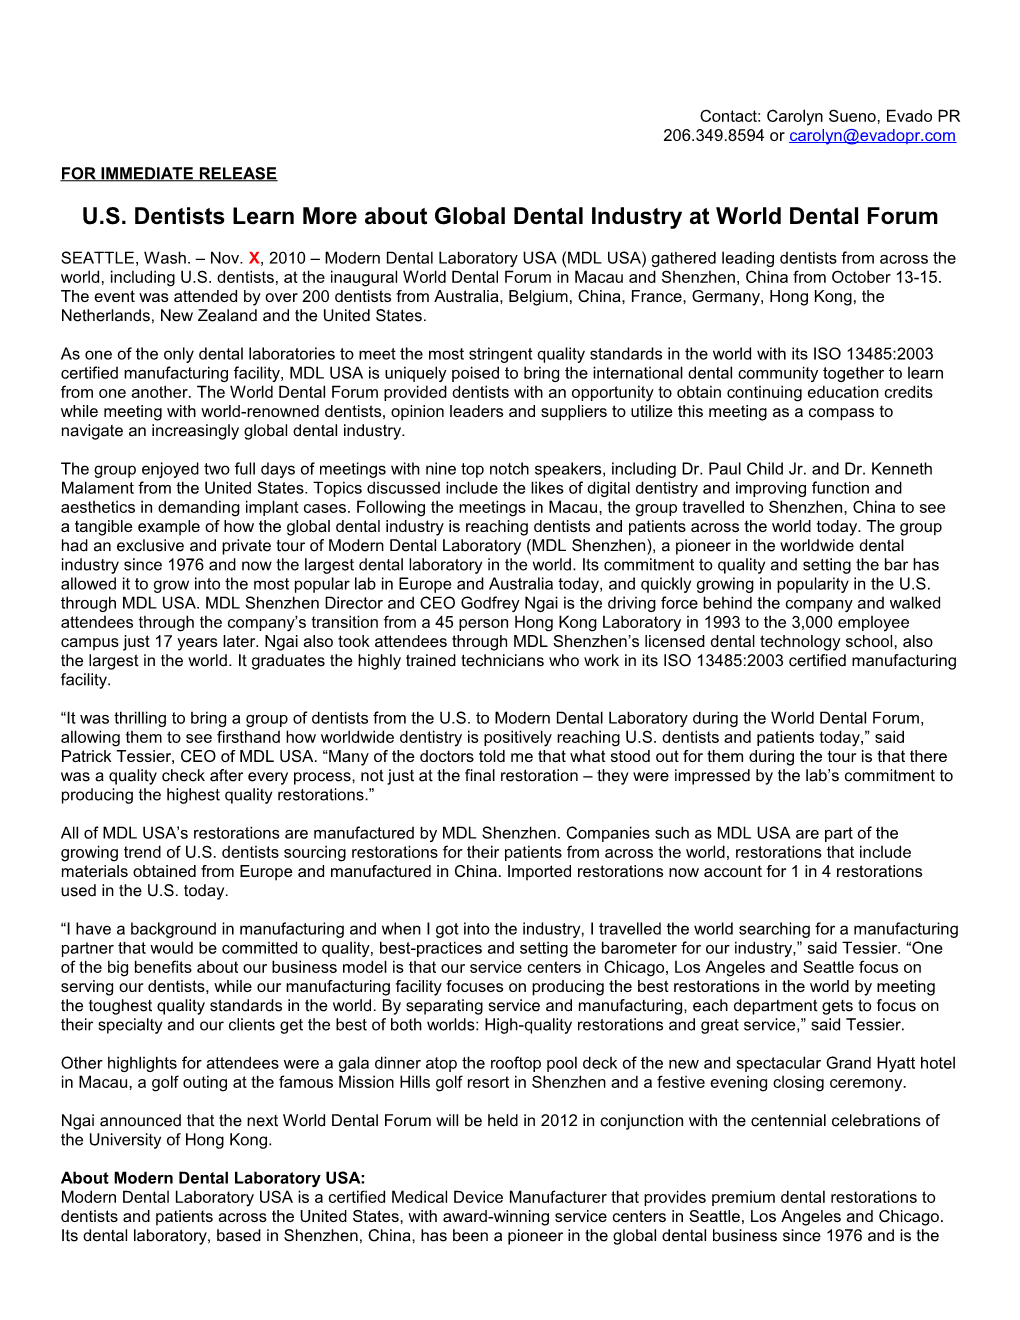 U.S. Dentists Learn More About Global Dental Industry at World Dental Forum